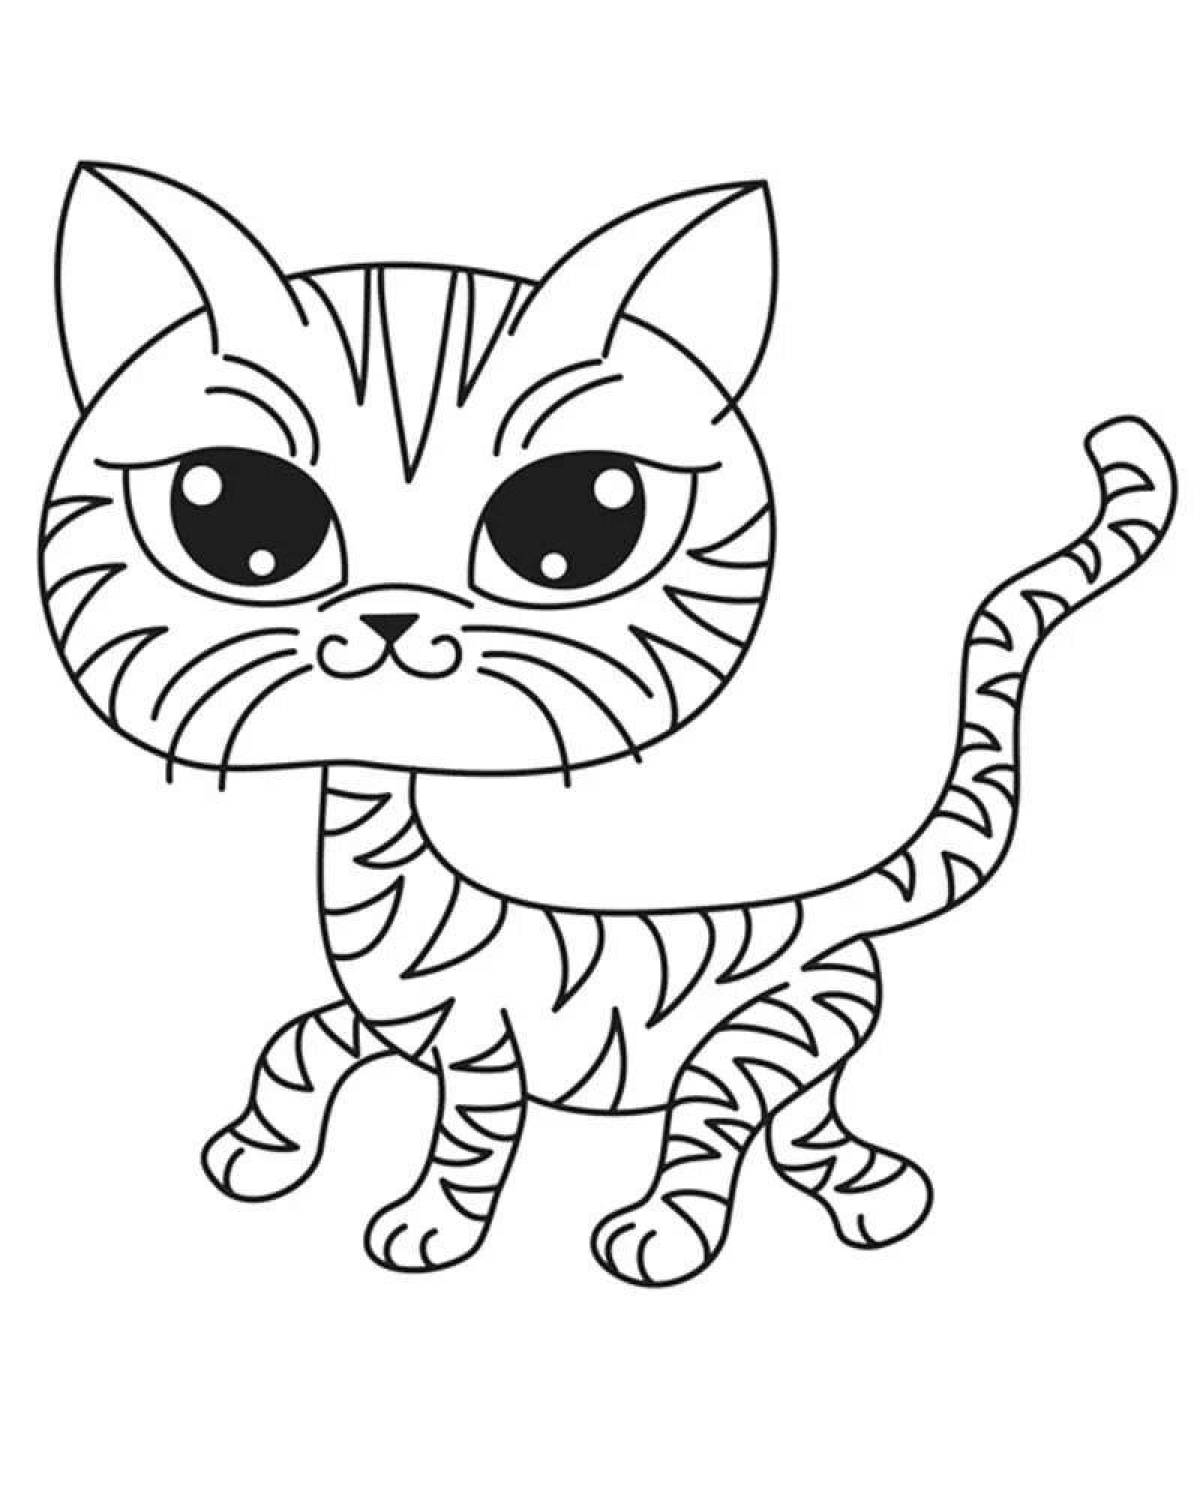 Naughty cats coloring pages